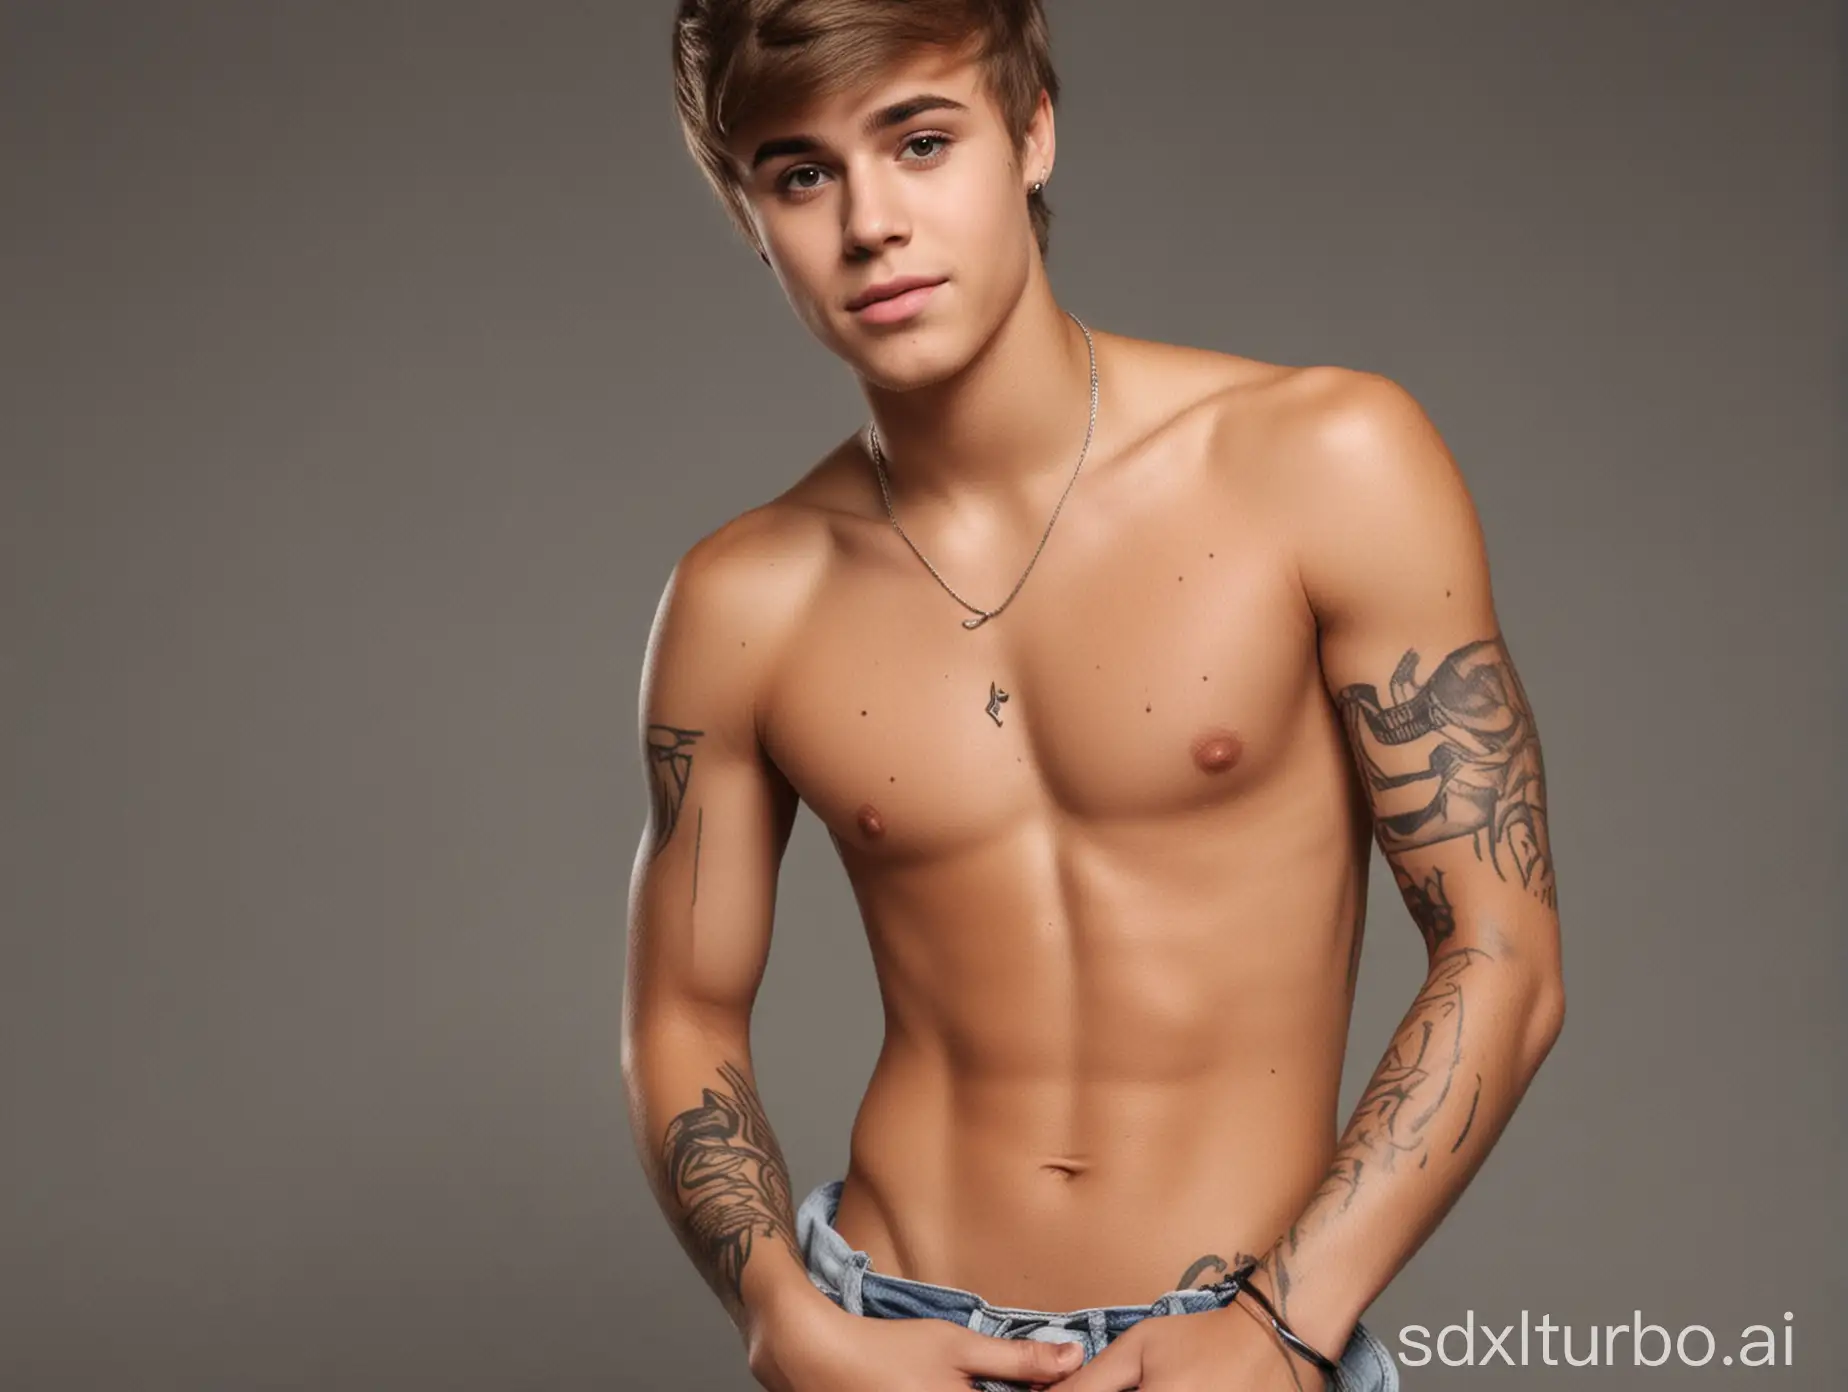 Realistic-Shirtless-and-Muscular-Portrait-of-Justin-Bieber